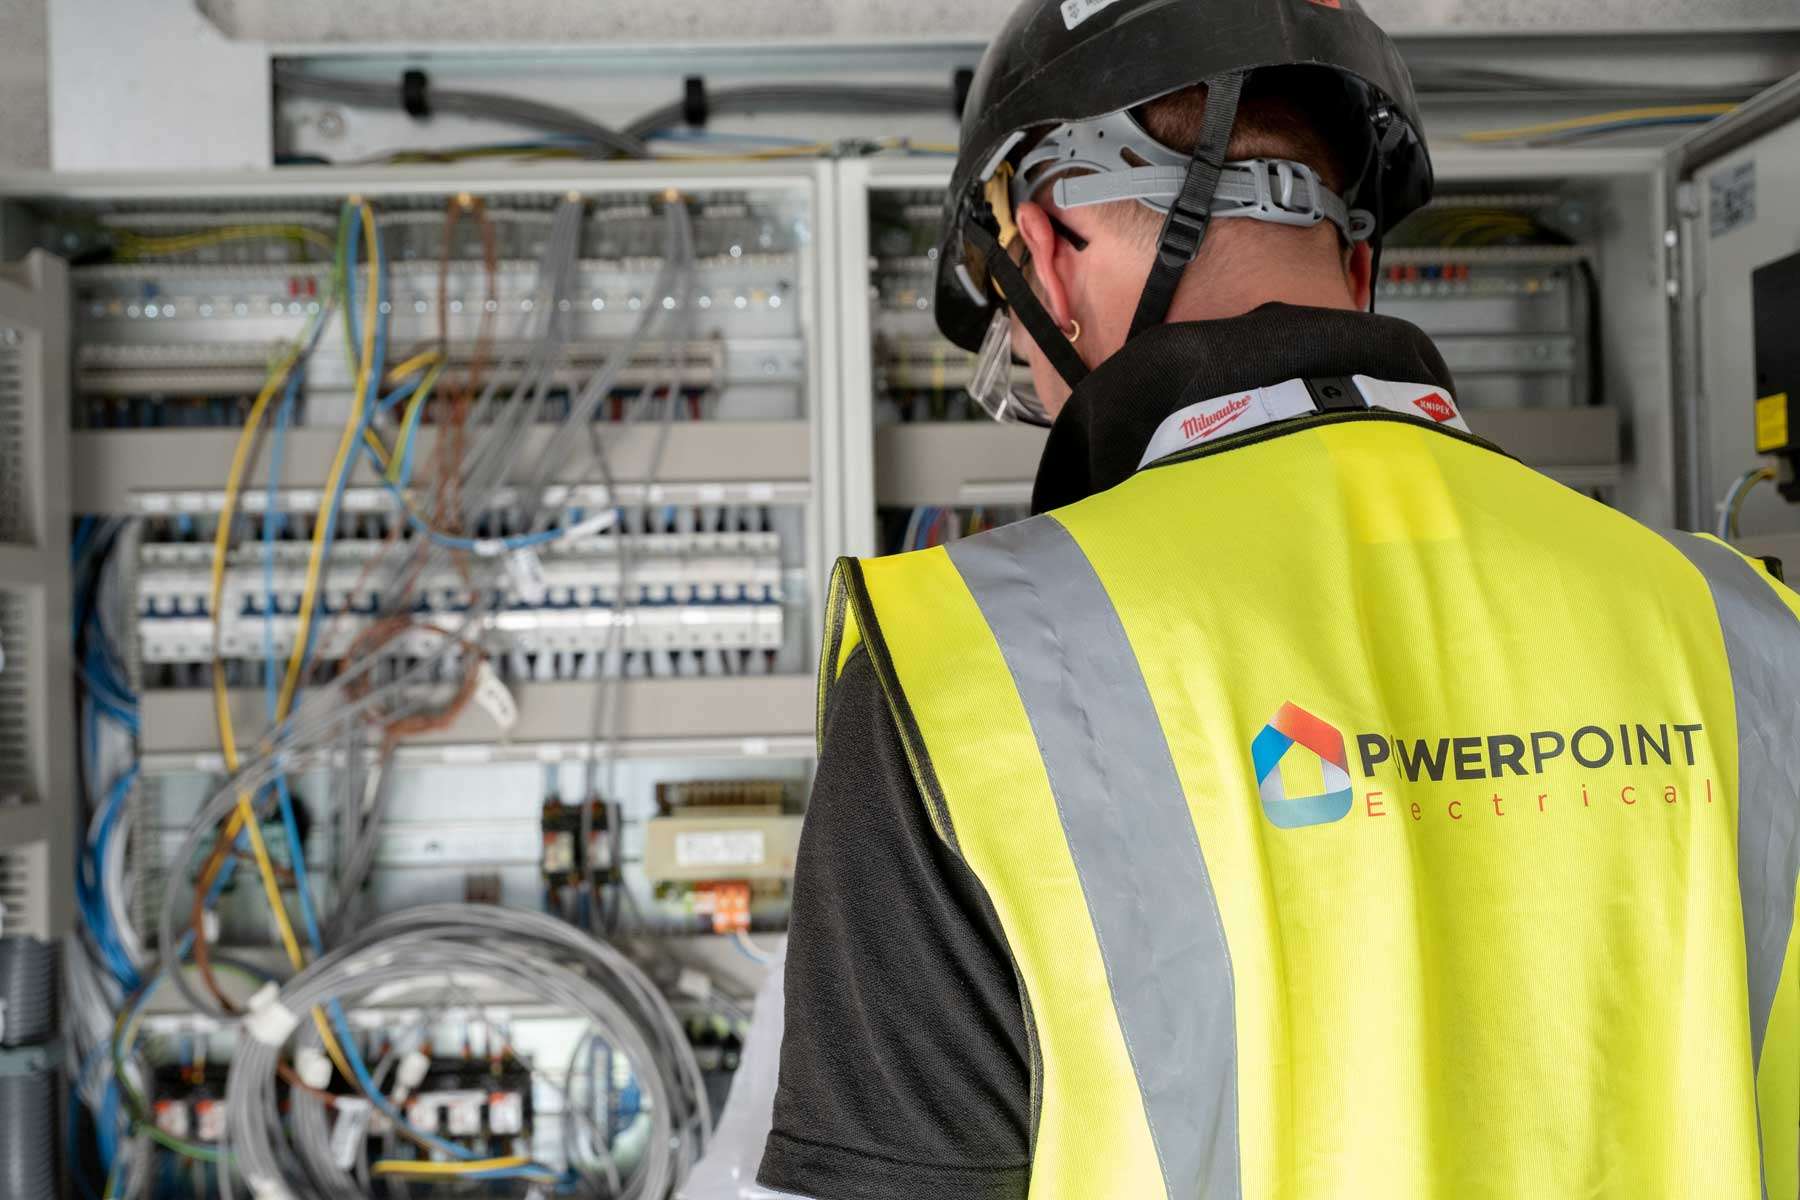 Powerpoint Electrical & Mechanical Services Experienced Team On Site Maintenance Repair Fault Finding